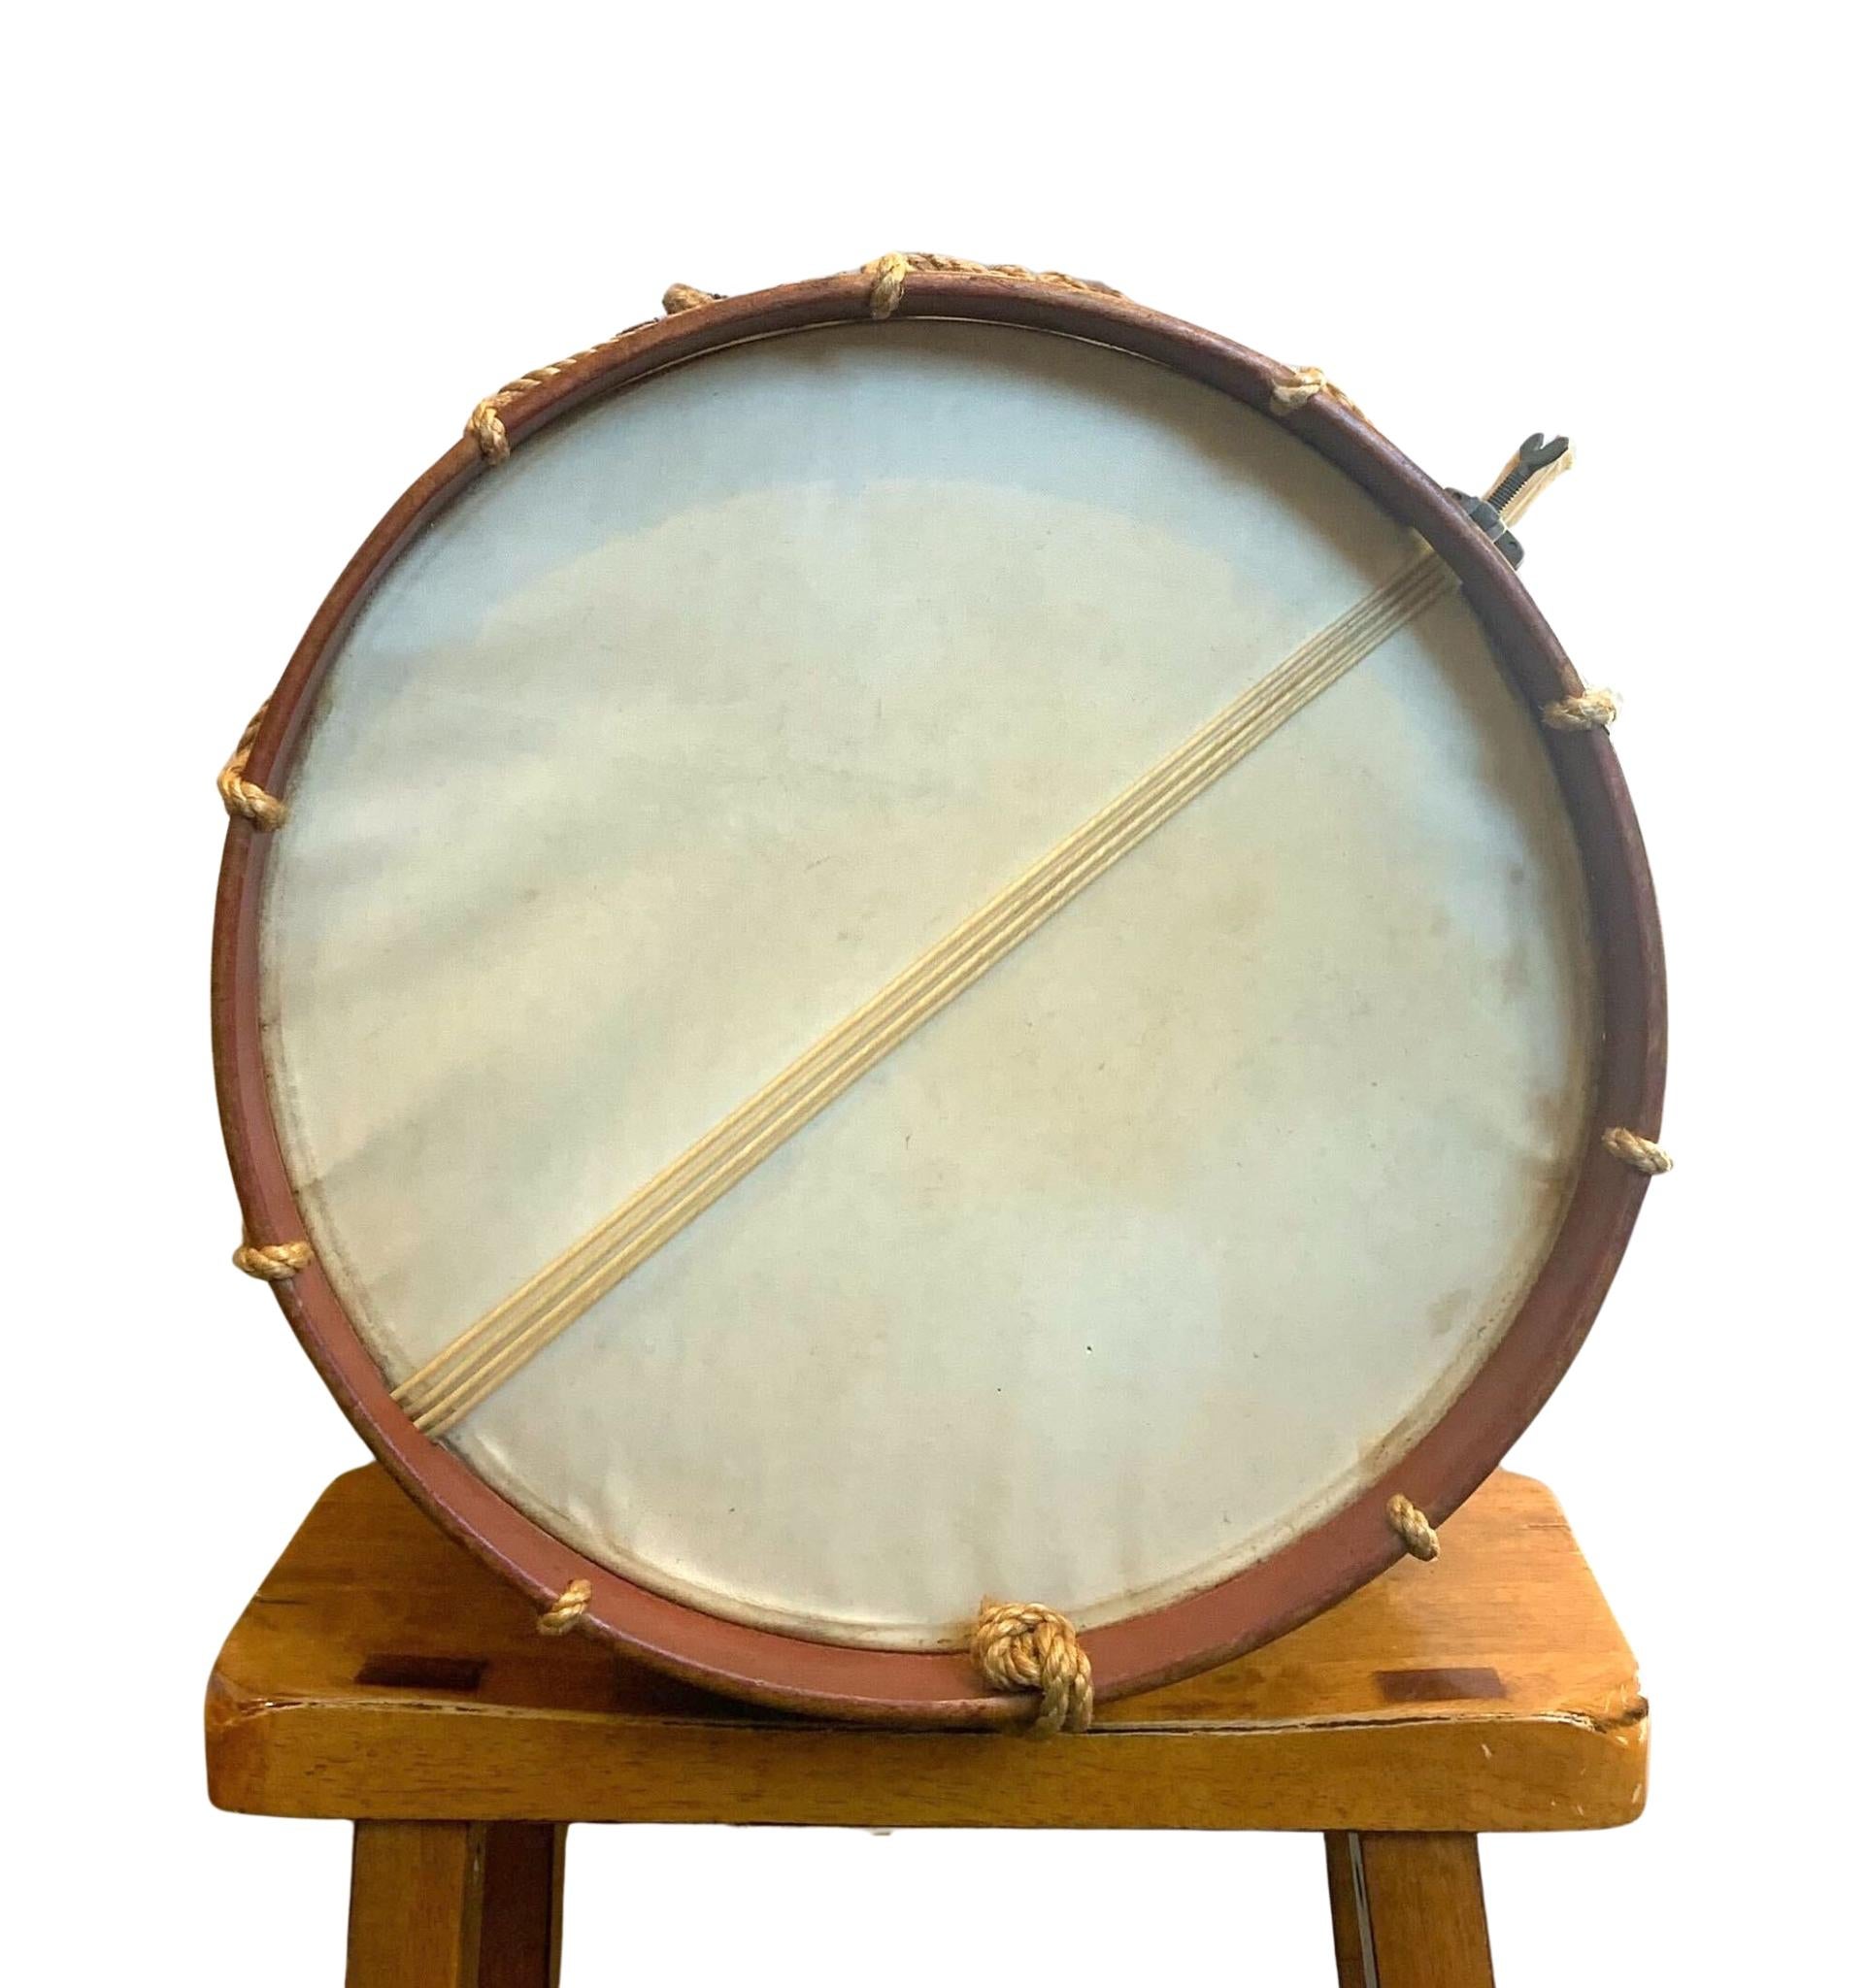 Civil War-Era Side Drum, Made by George Kilbourn, 1859 In Good Condition For Sale In Colorado Springs, CO